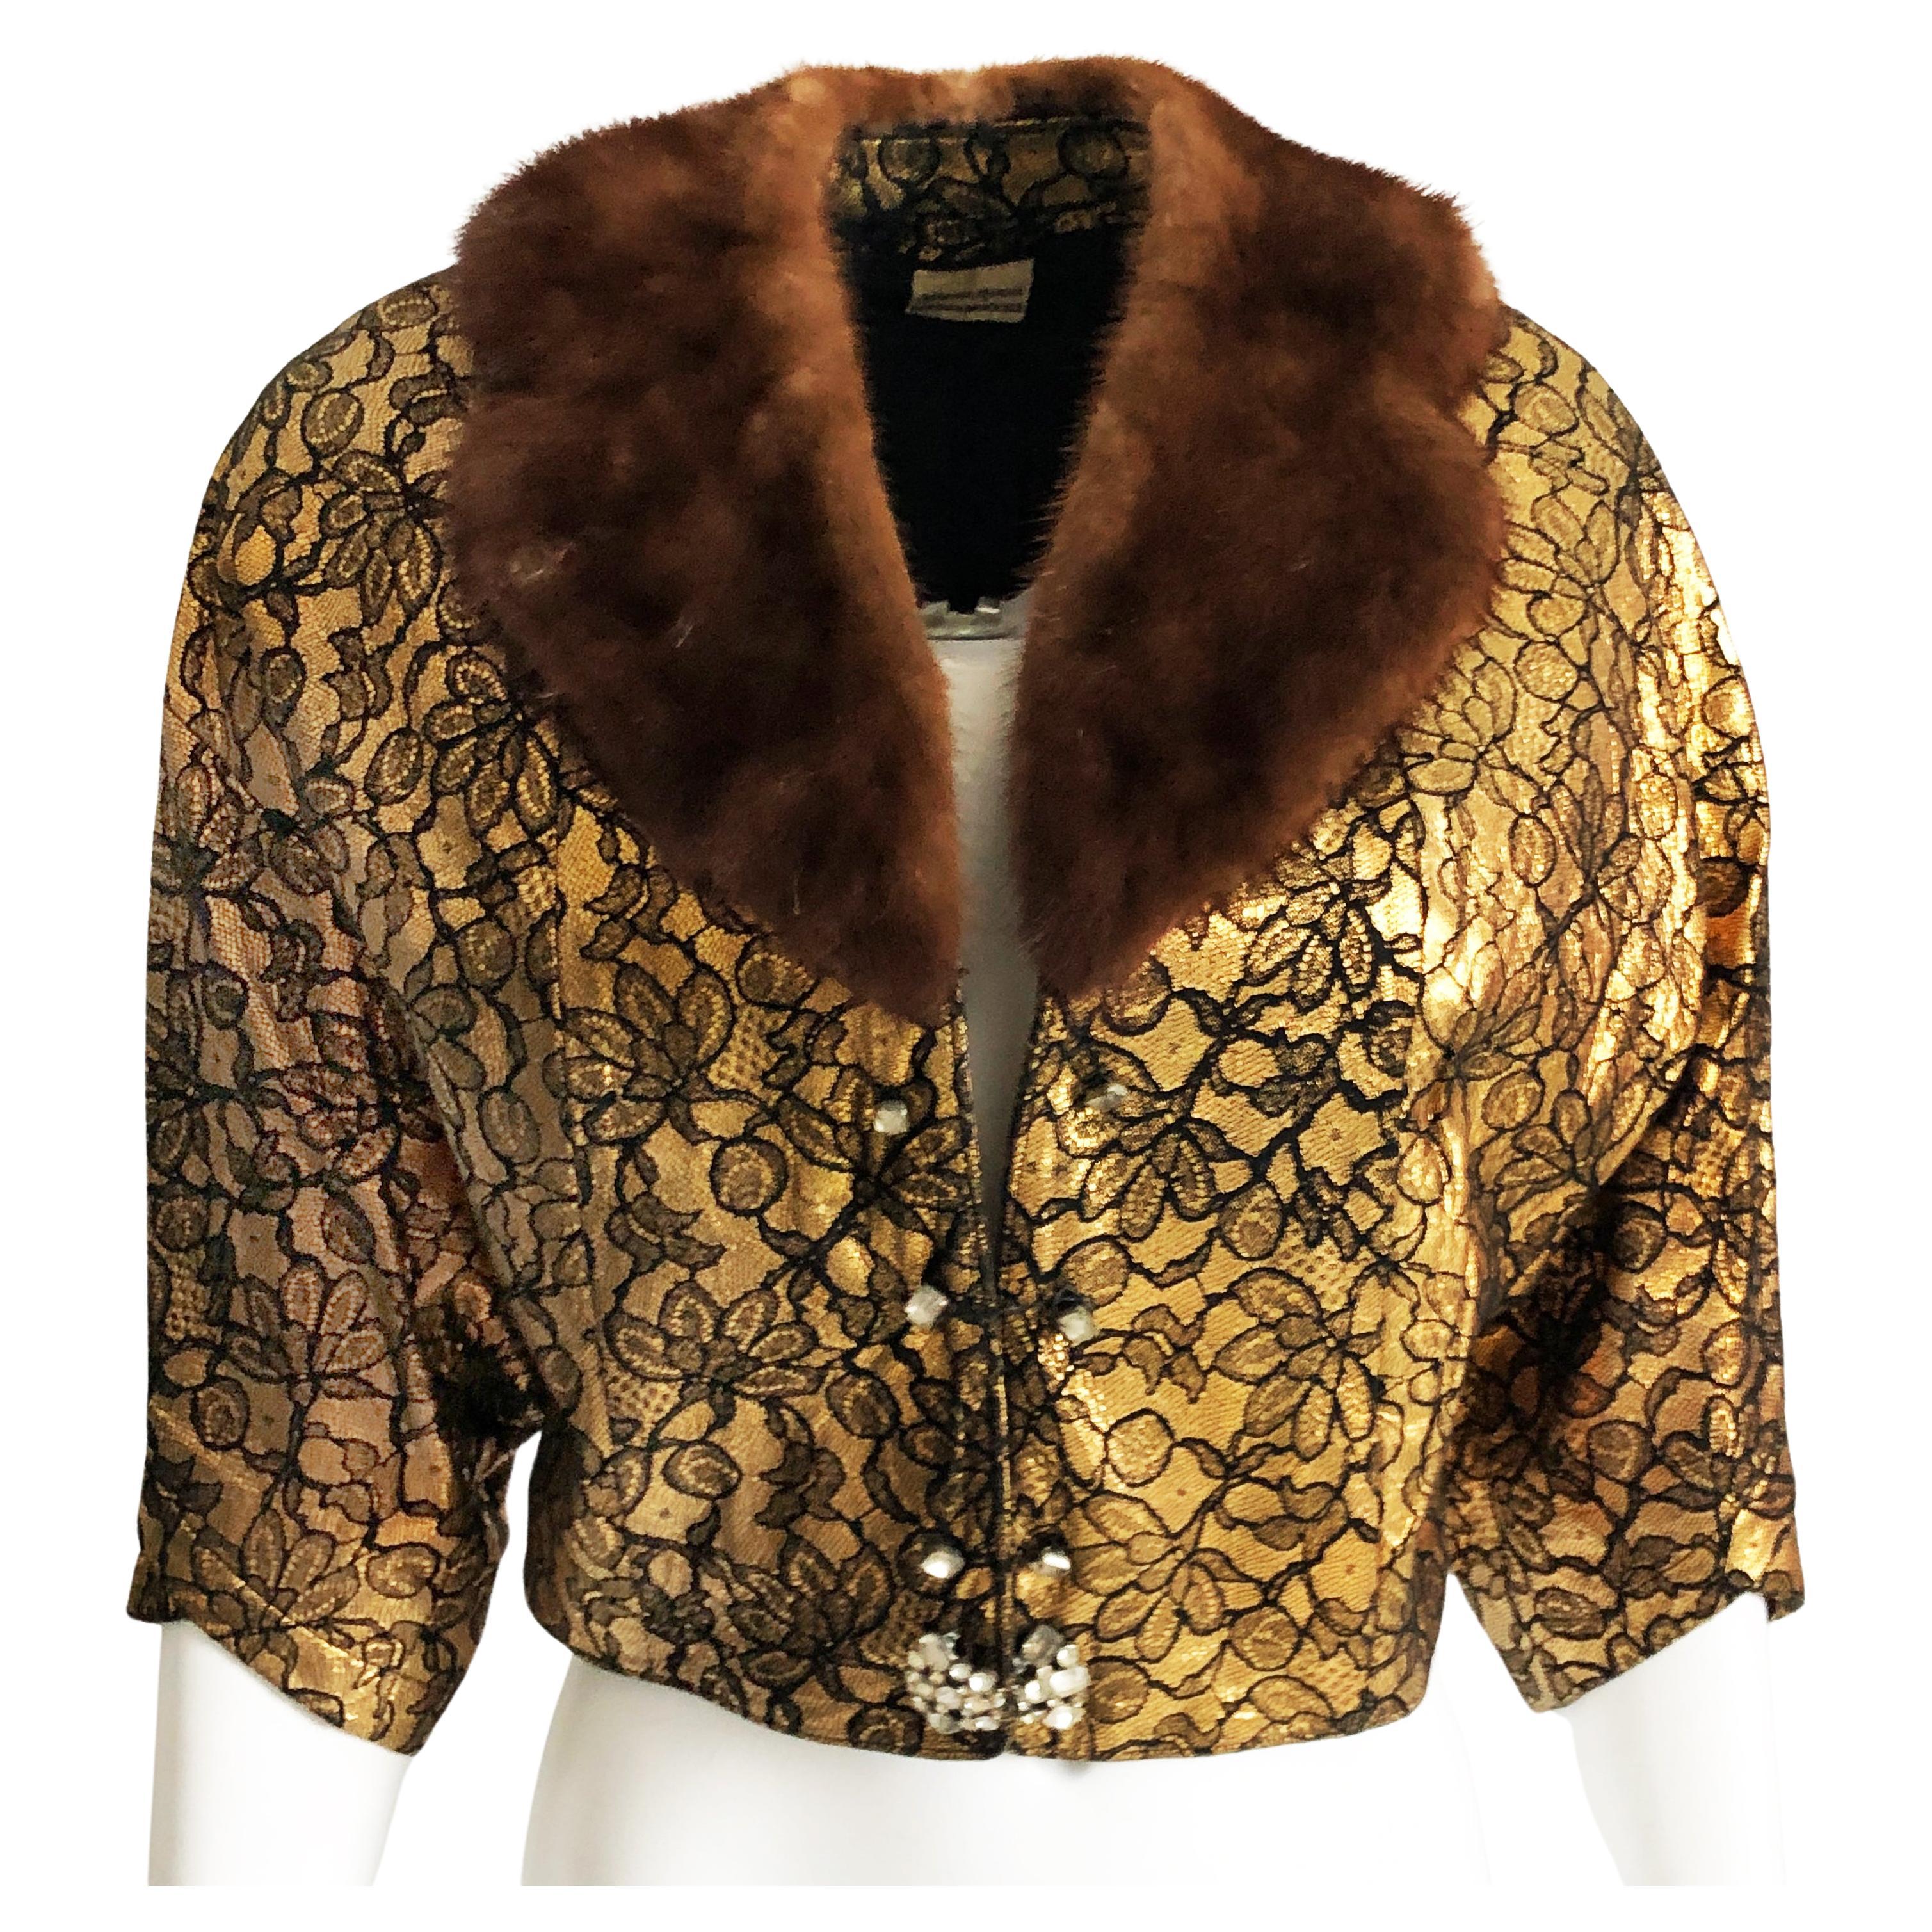 Be retro-fabulous in this preowned, vintage gold and black jacket, sold by Neiman Marcus Trophy Room, most likely in the 1950s.  Made from what we believe is gold leather (no content label), it's embossed with a decorative black floral and net